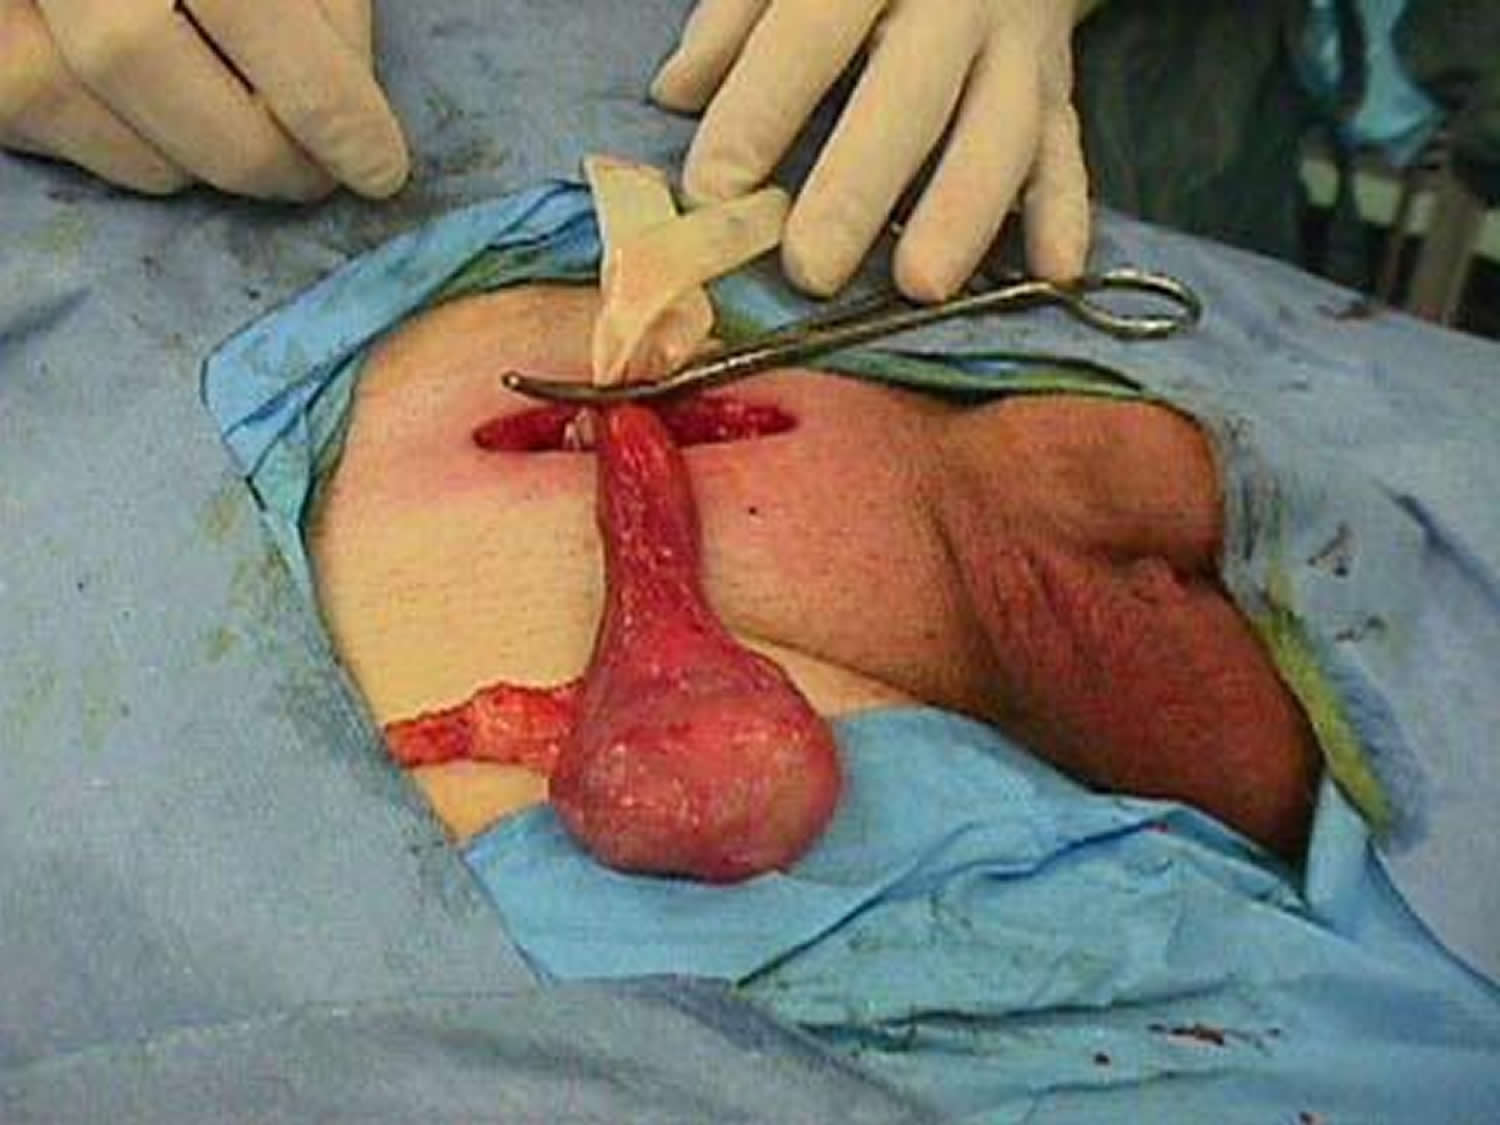 Surgery to remove a testicle with cancer is called a radical inguinal orchi...